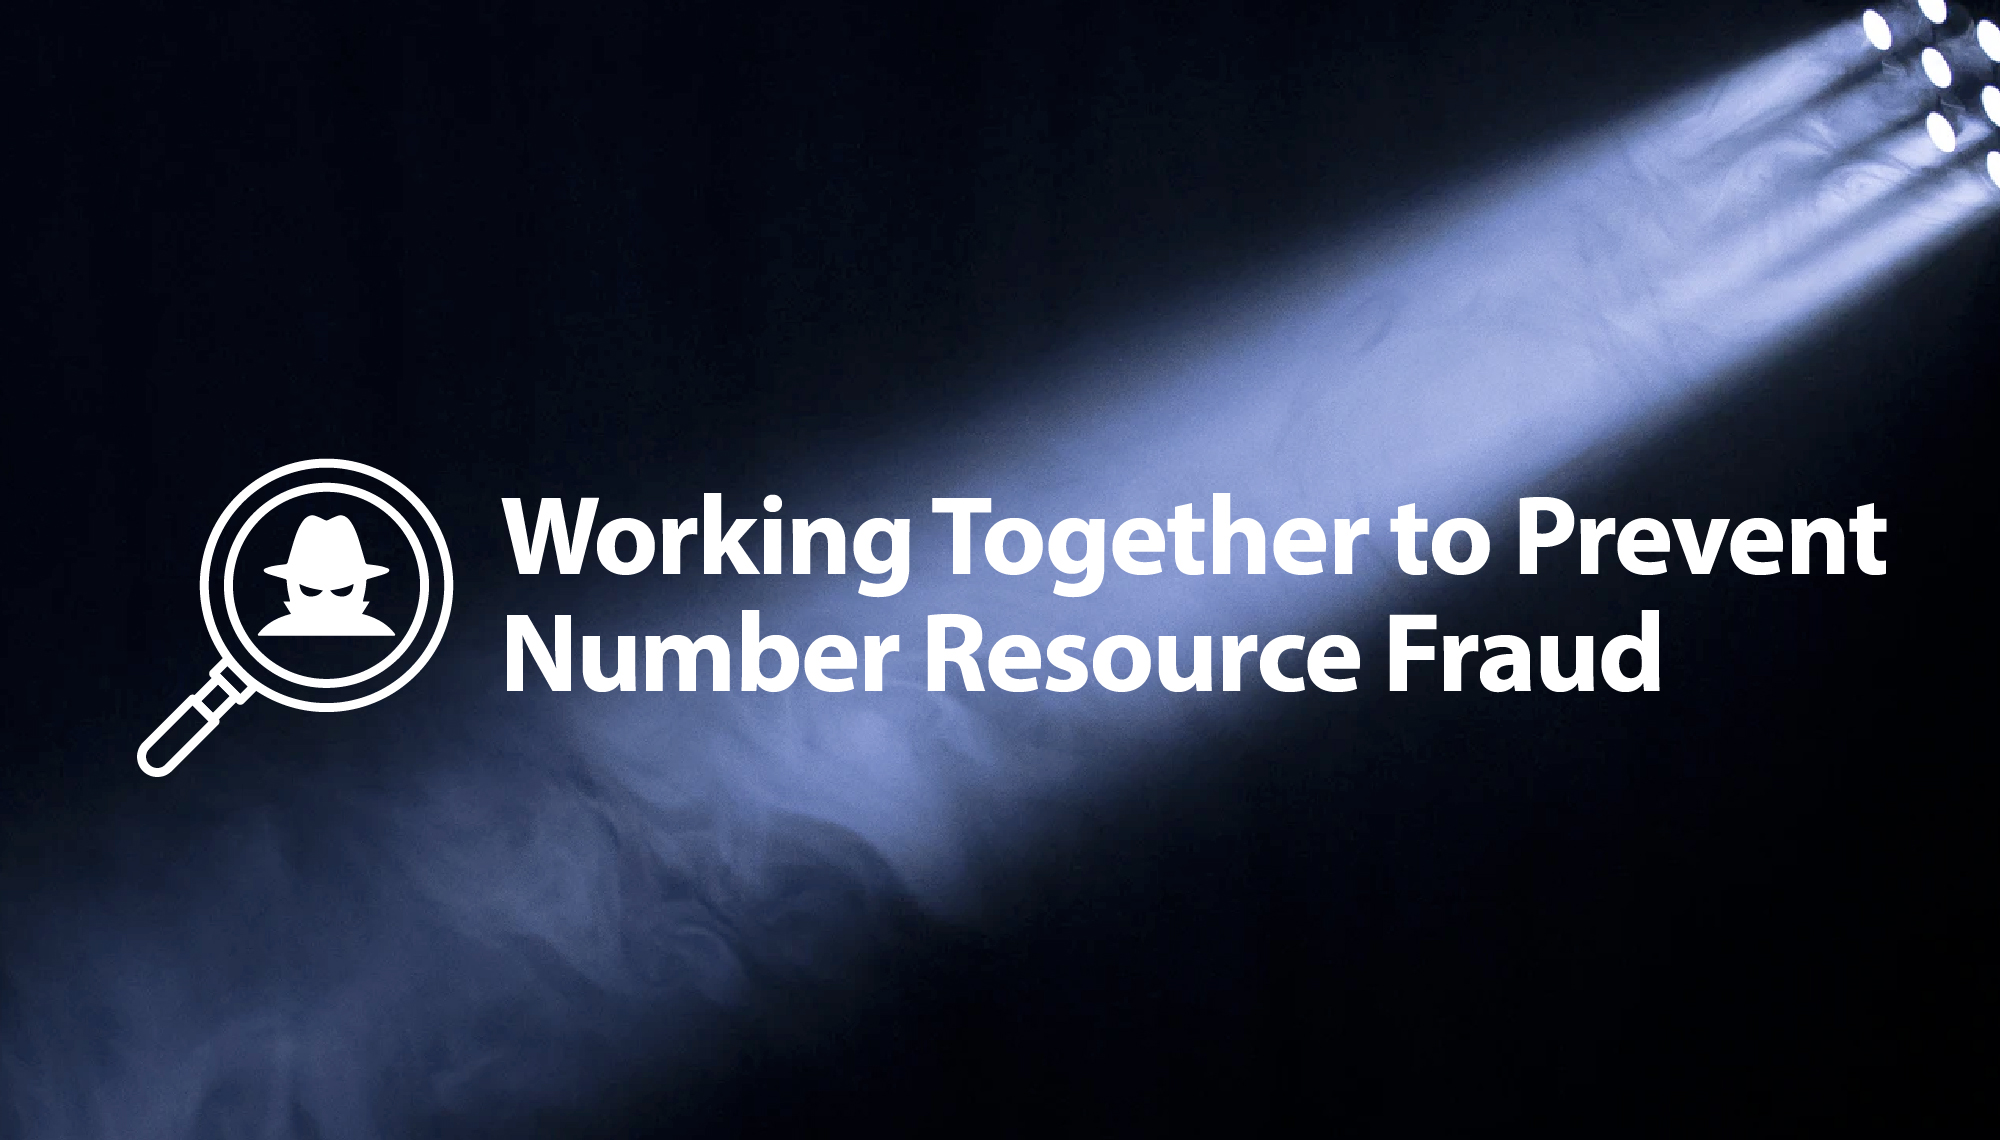 Working Together to Prevent Number Resource Fraud